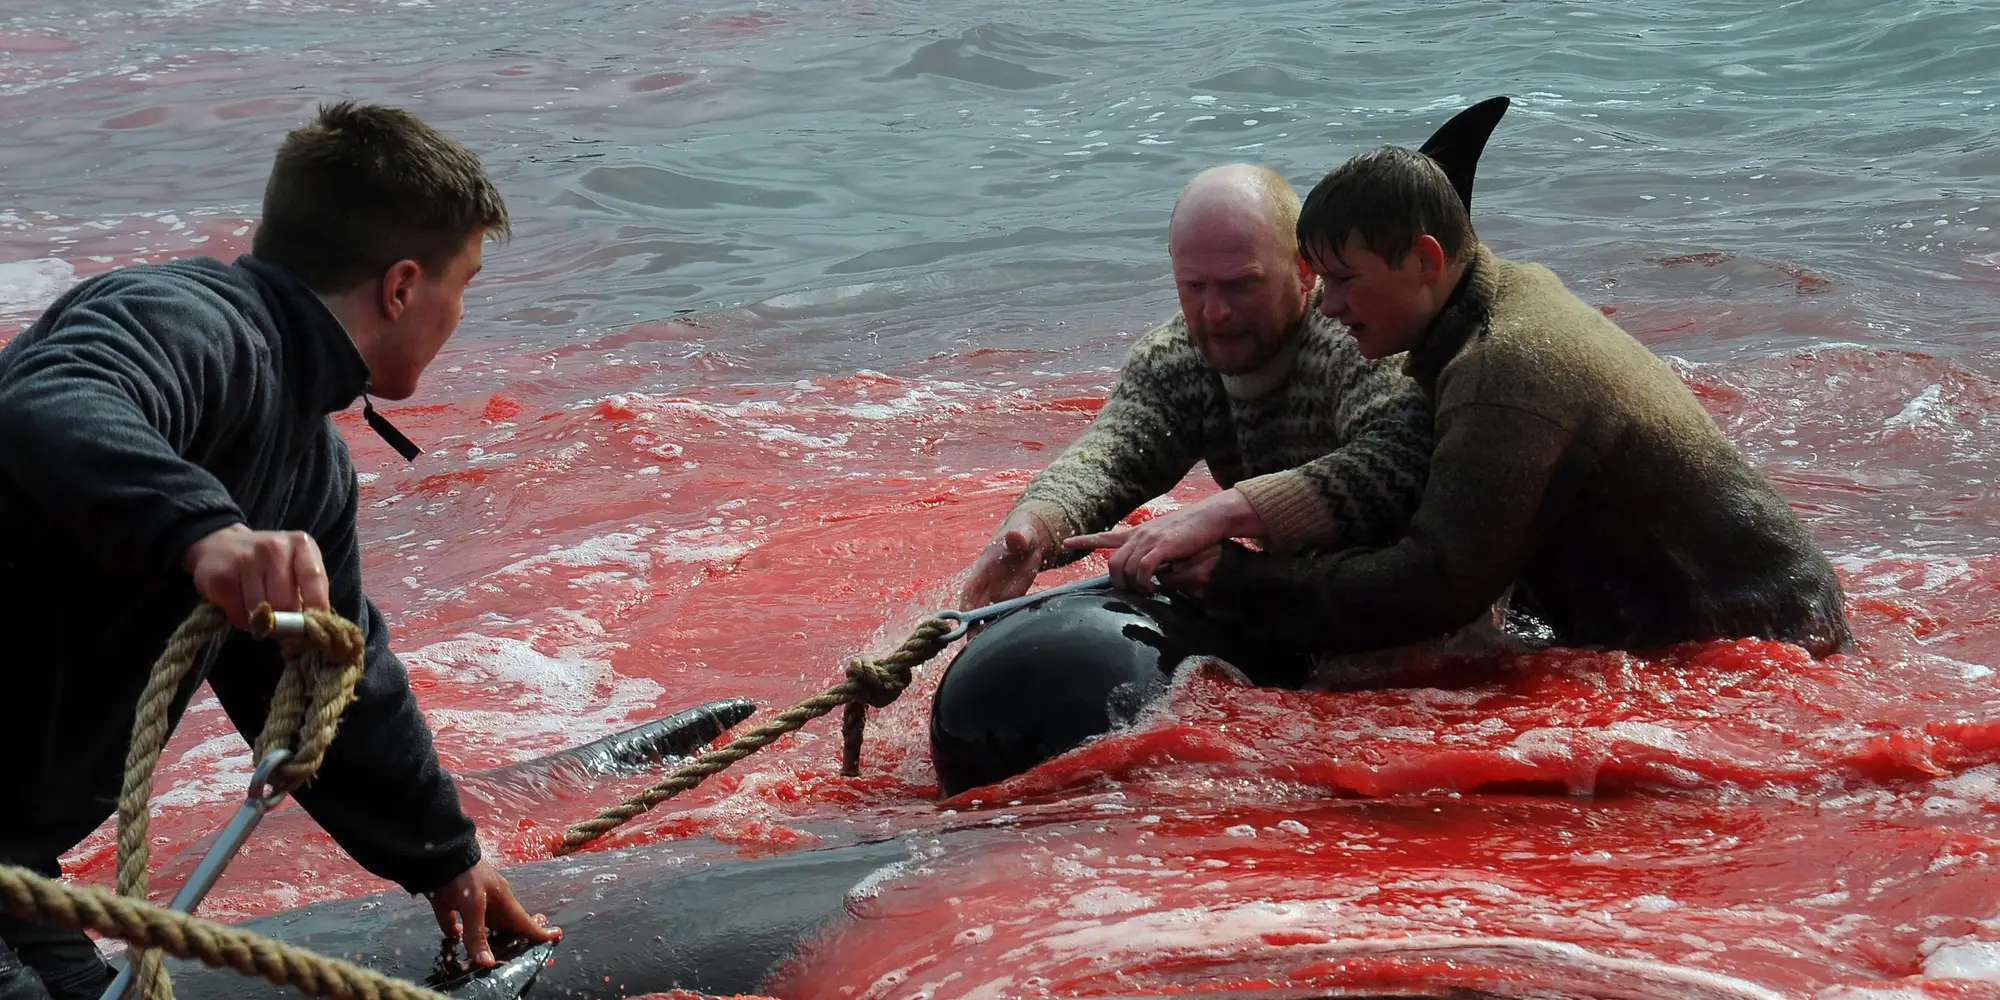 The sea runs red with blood as people of the Faroe Islands slaughter pilot whales during the annual “grind hunt”. Photo: Andrija Ilic / Reuters